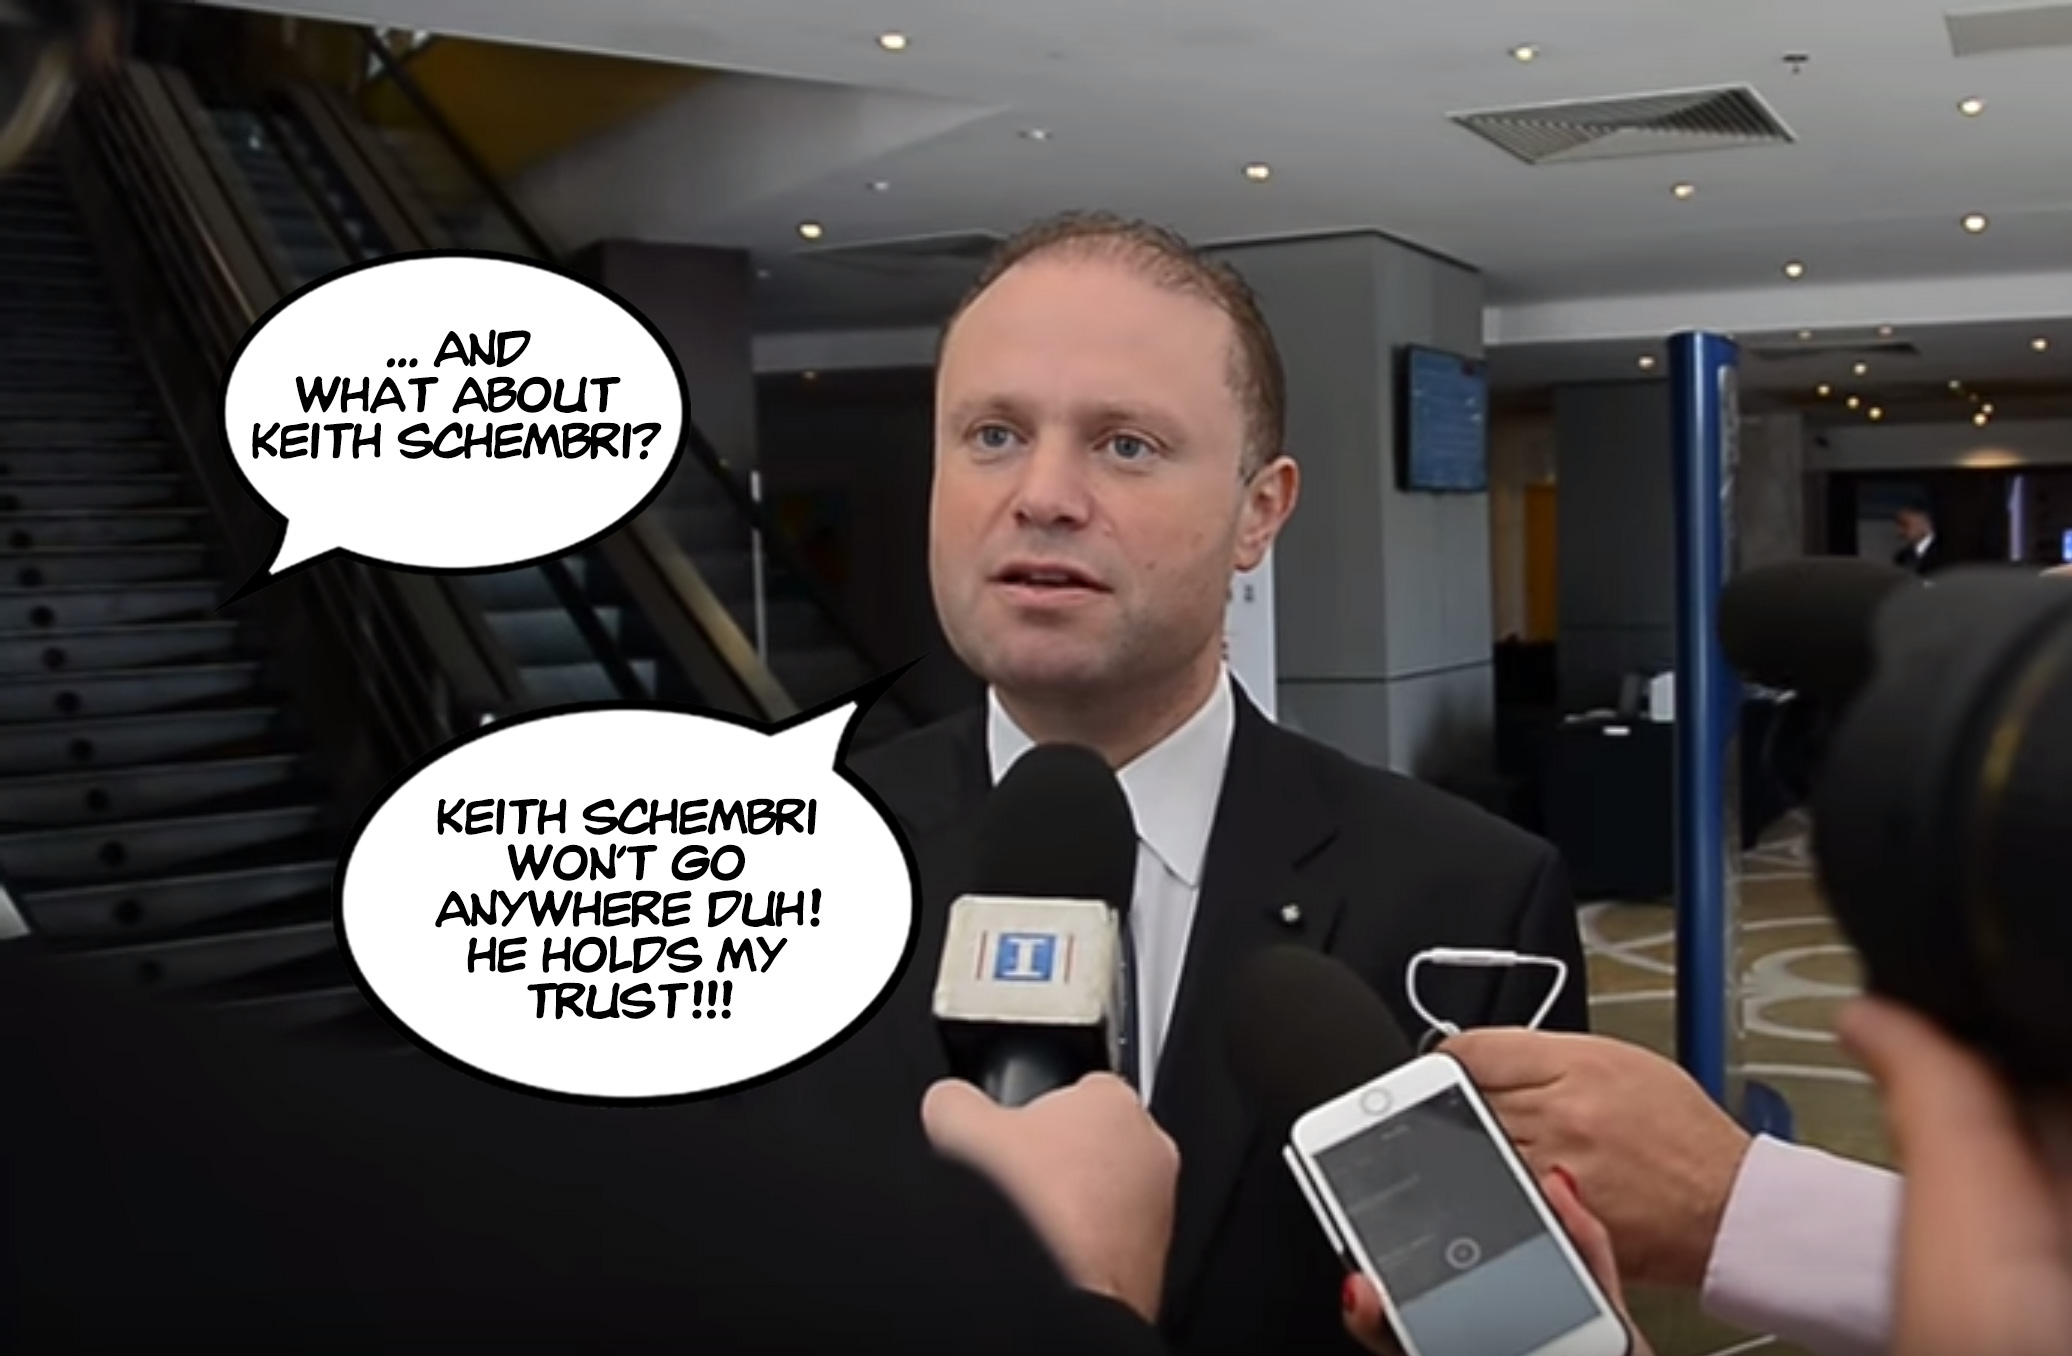 KEITH SCHEMBRI HOLDS MY TRUST